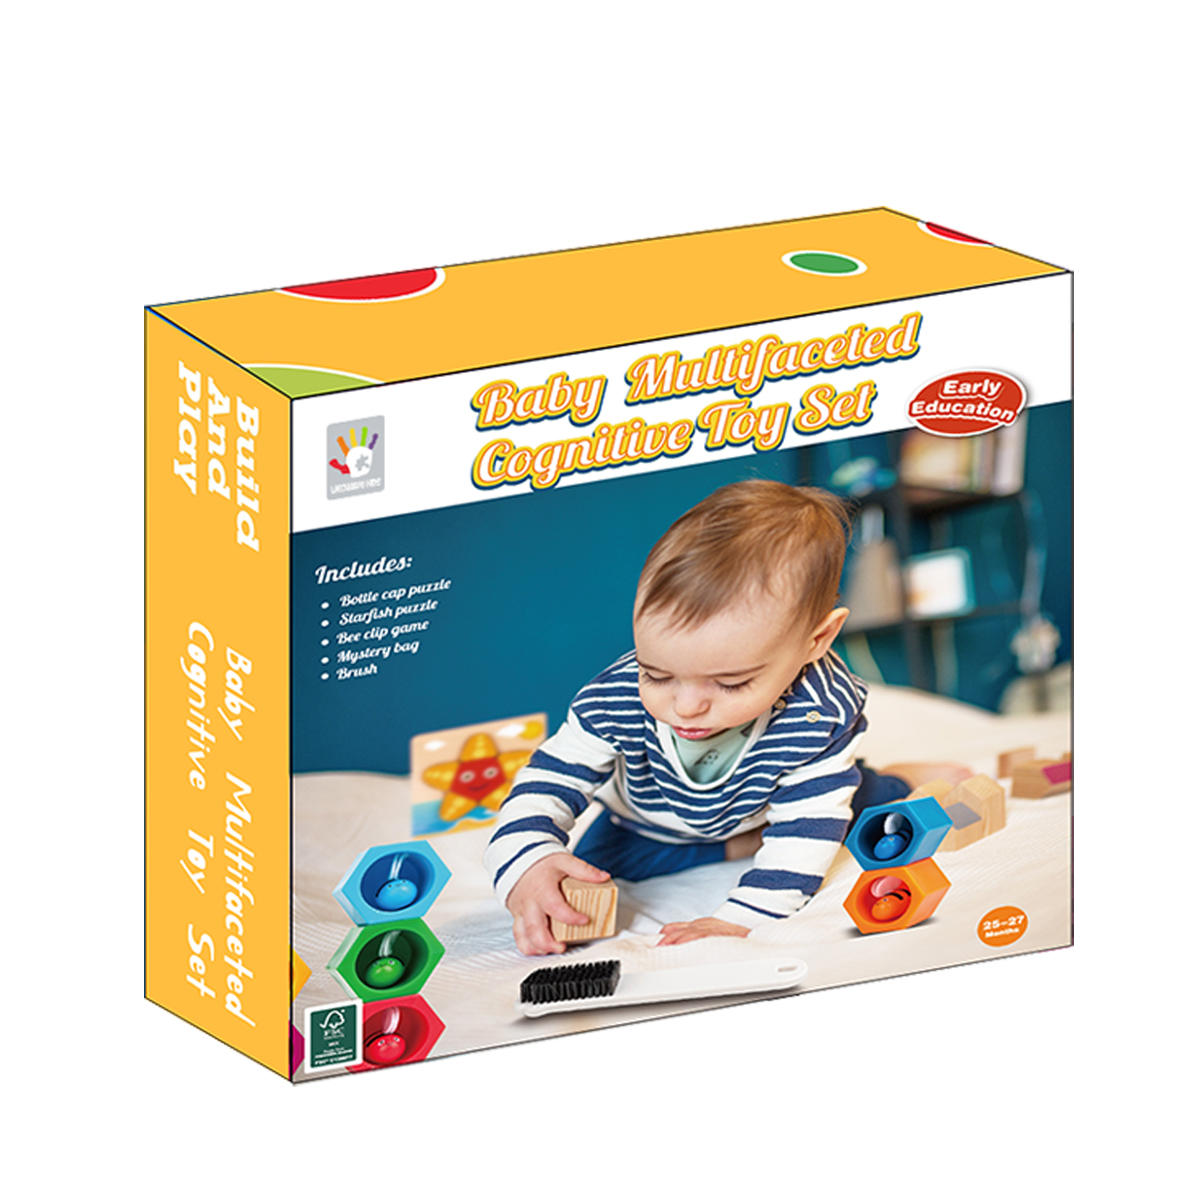 Baby Multfaceted Cognitiv Toy Set